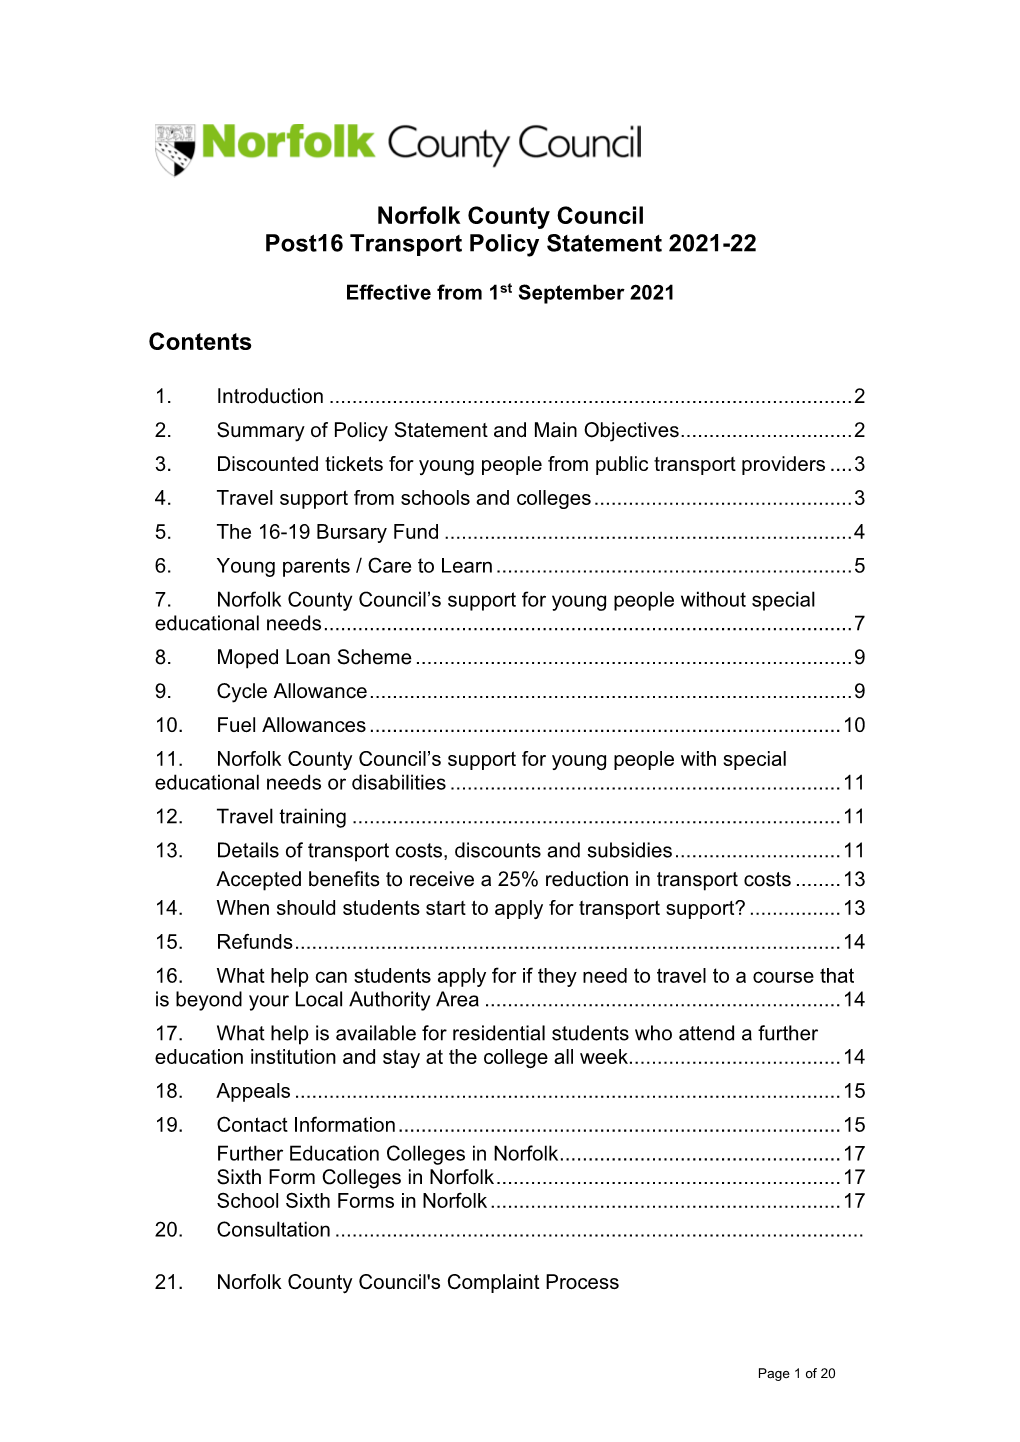 Post16 Transport Policy Statement 2021-22